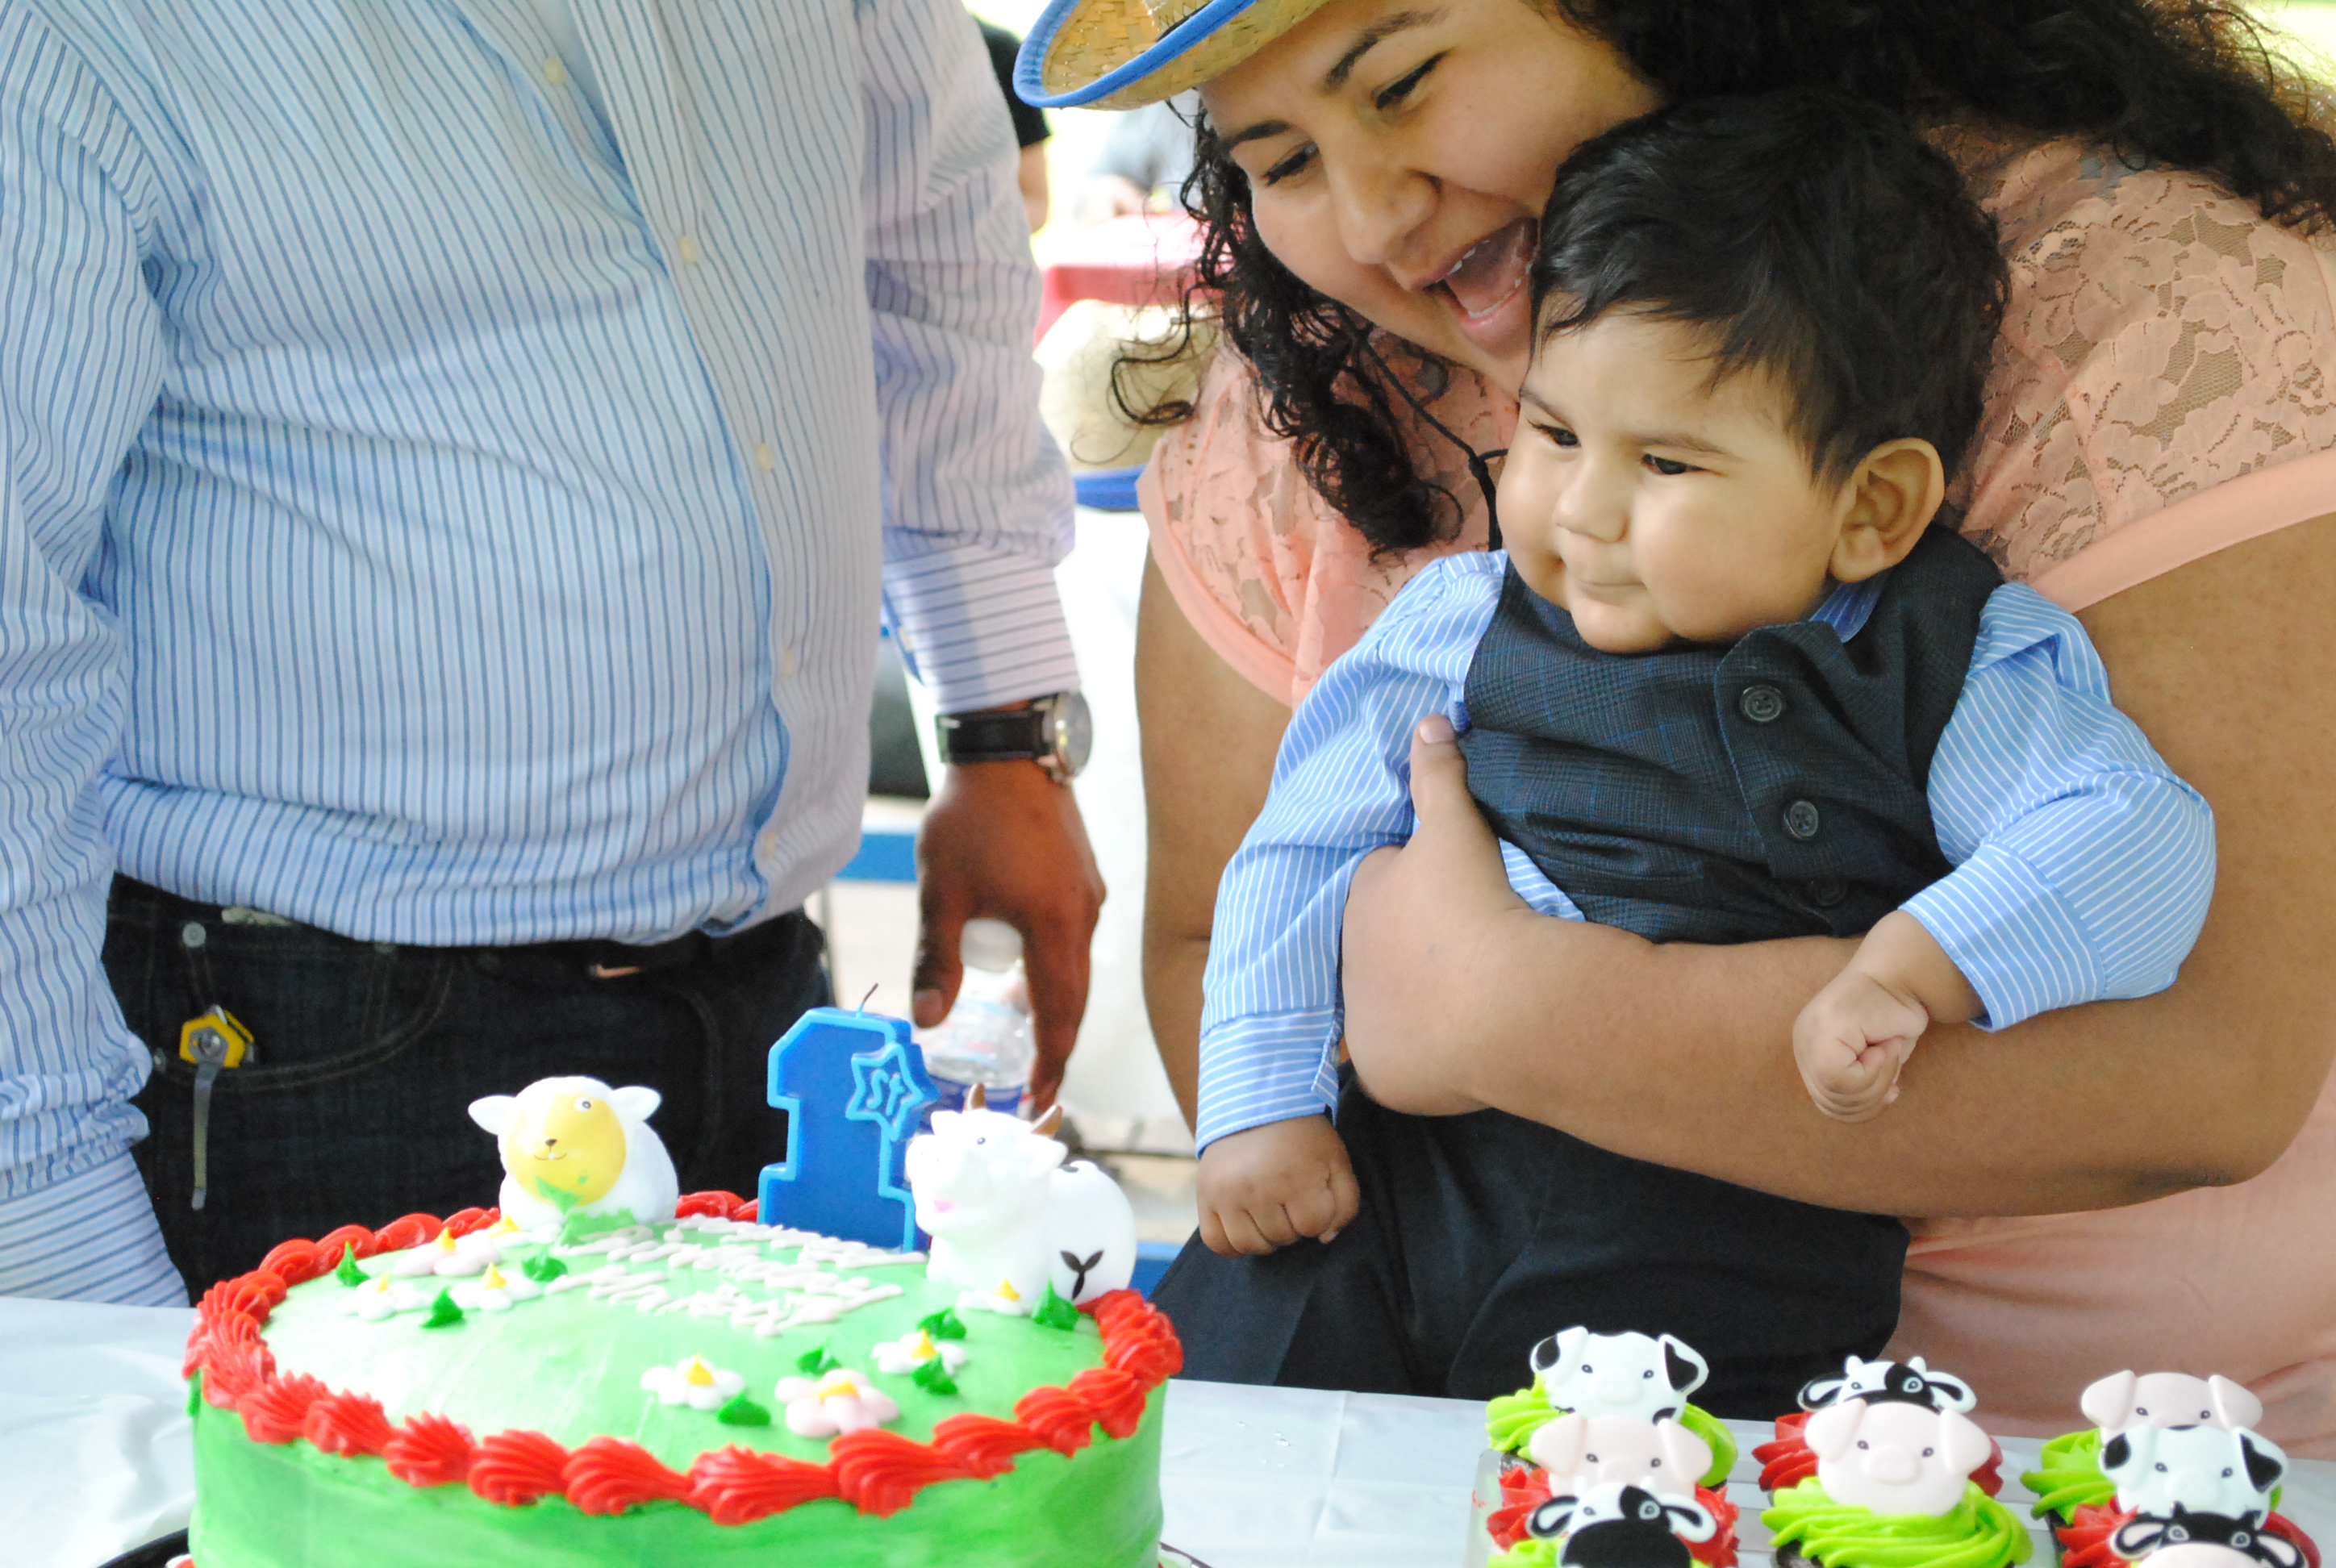 Mateo and his parents with a cake on his first birthday